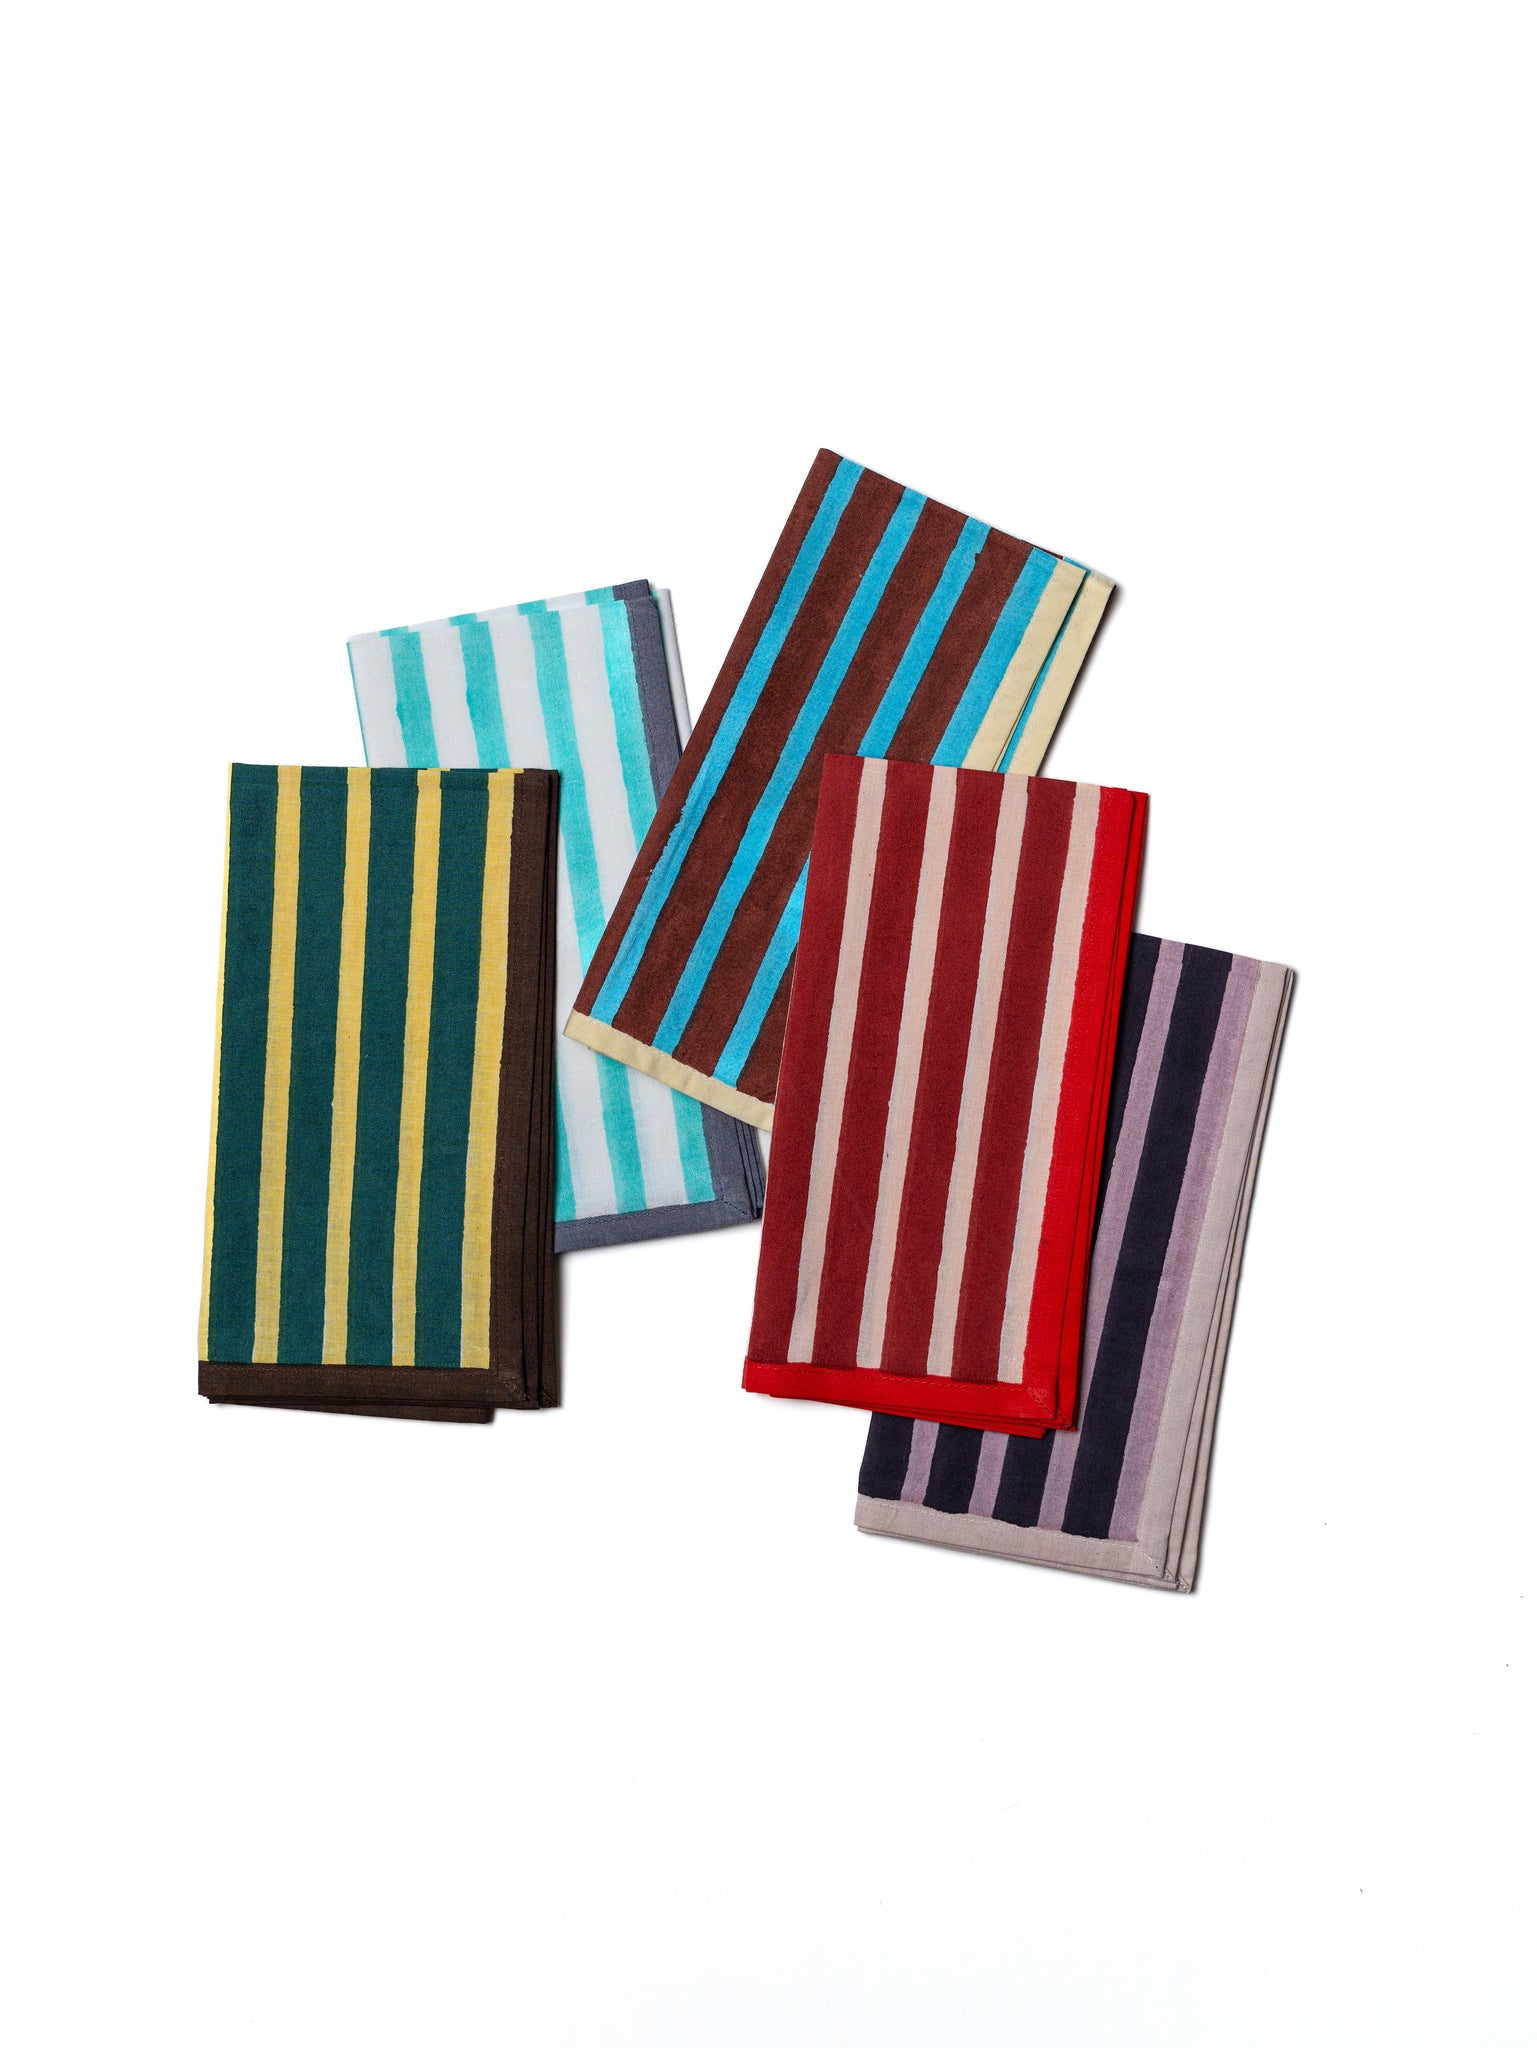 Block stripe napkins set of two - blue and brown